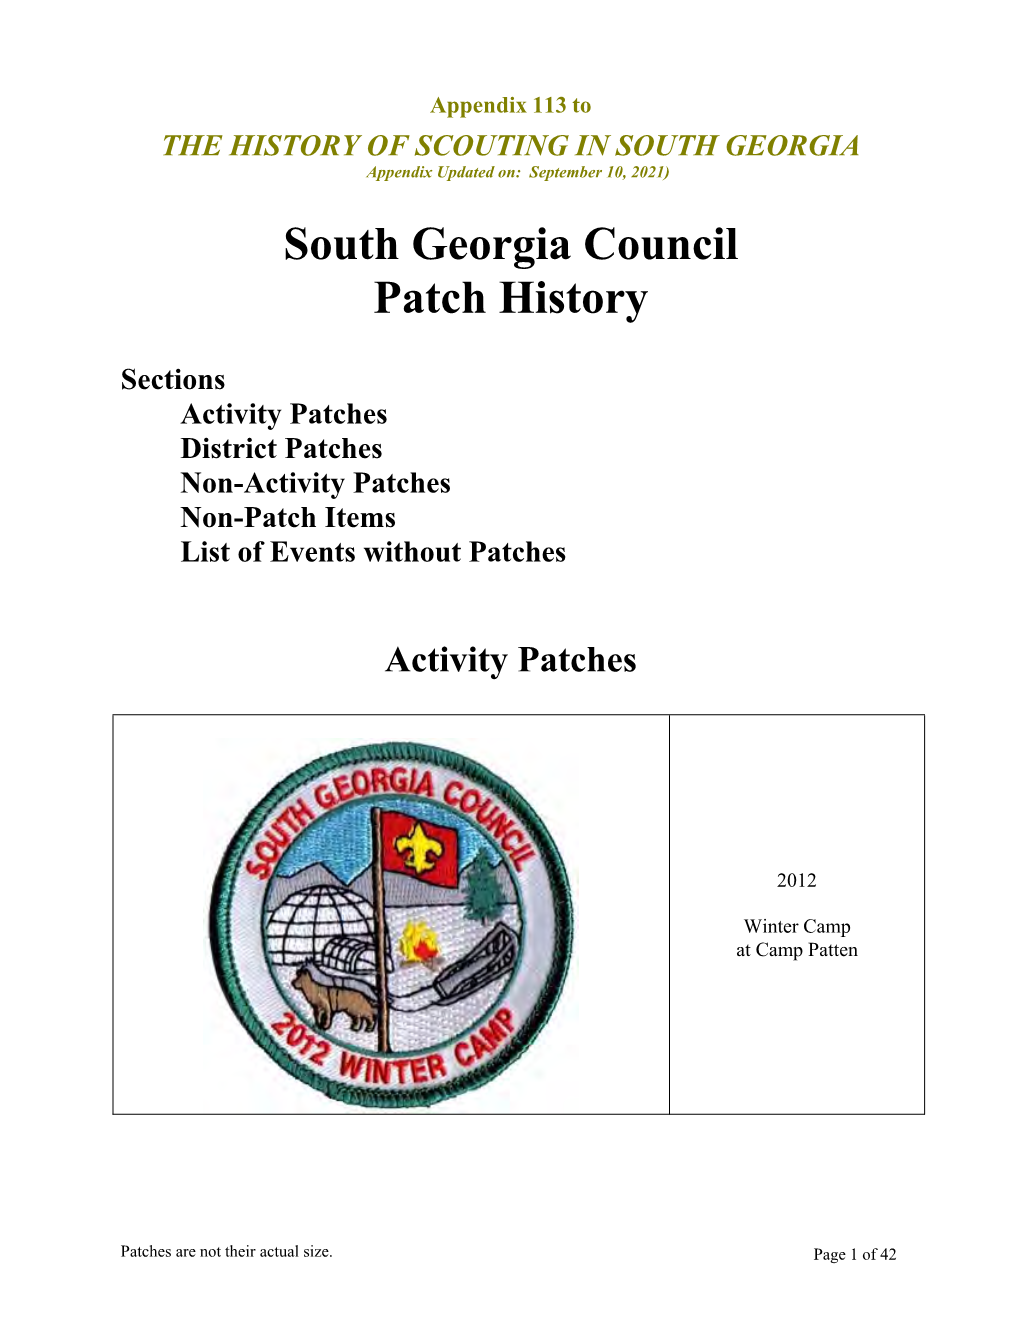 South Georgia Council Patch History